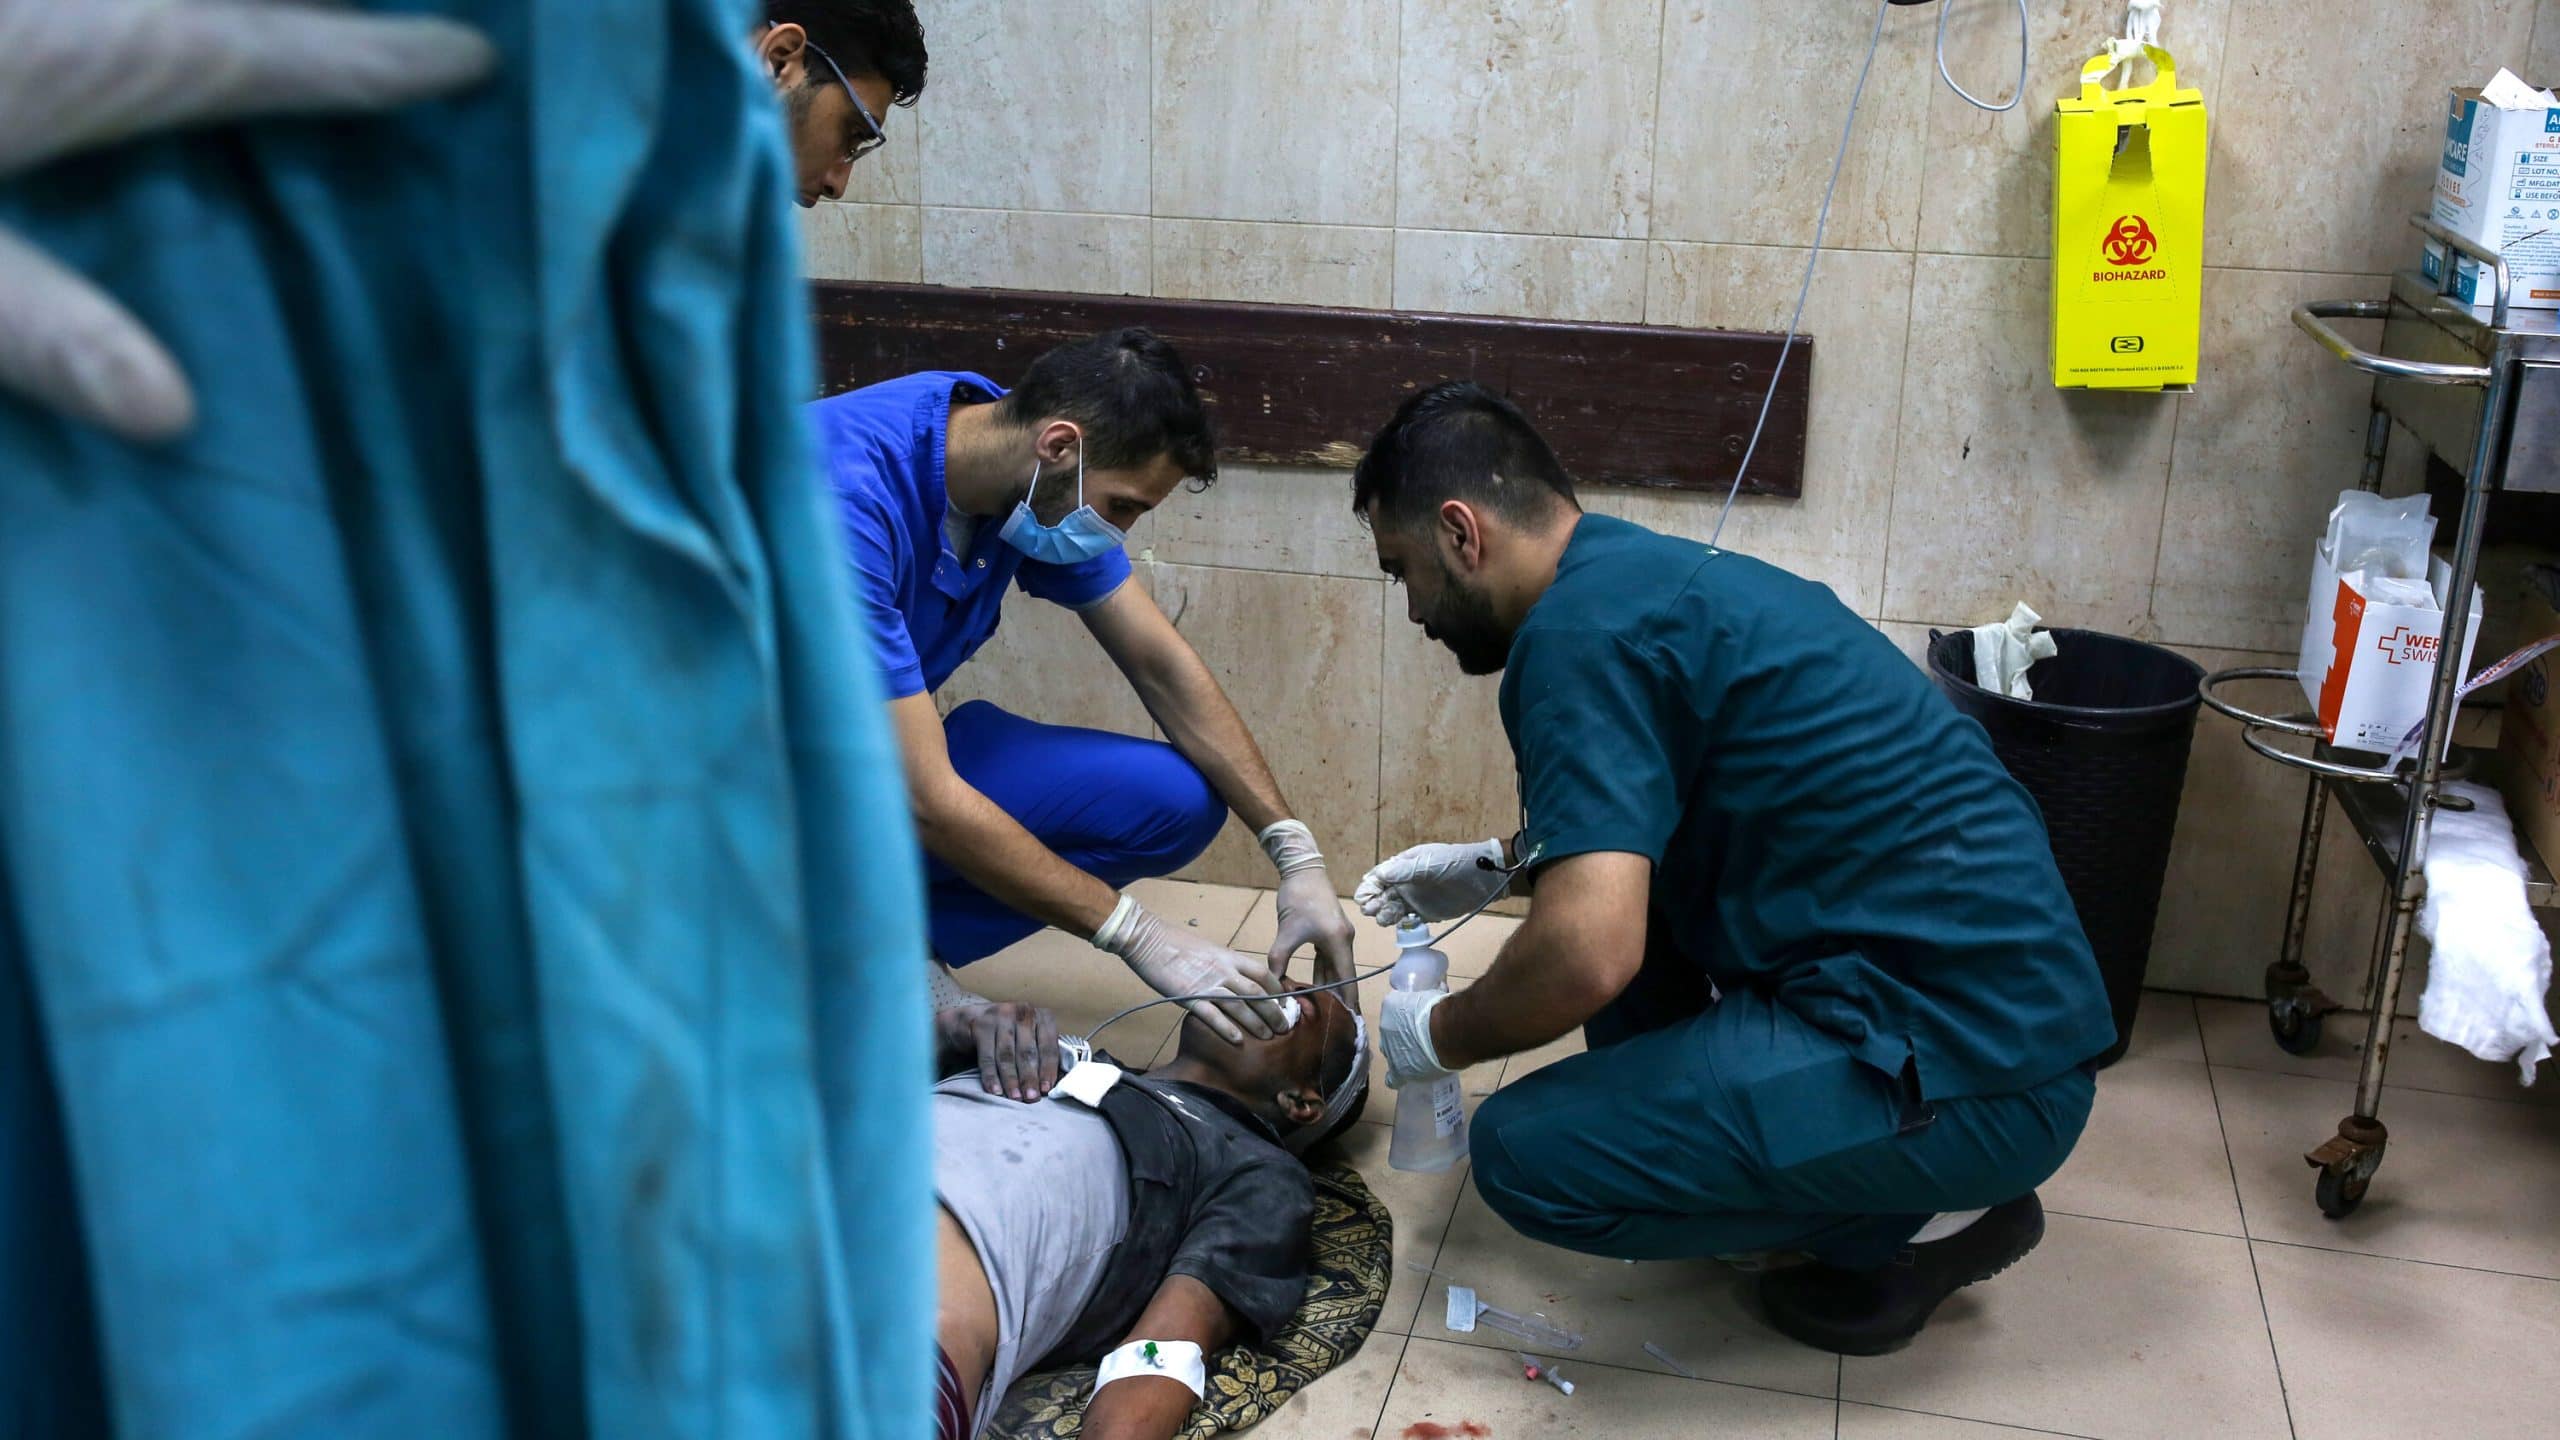 Gaza's Nasser Hospital left inoperative due to escalating conflict (Credits: The NY Times)